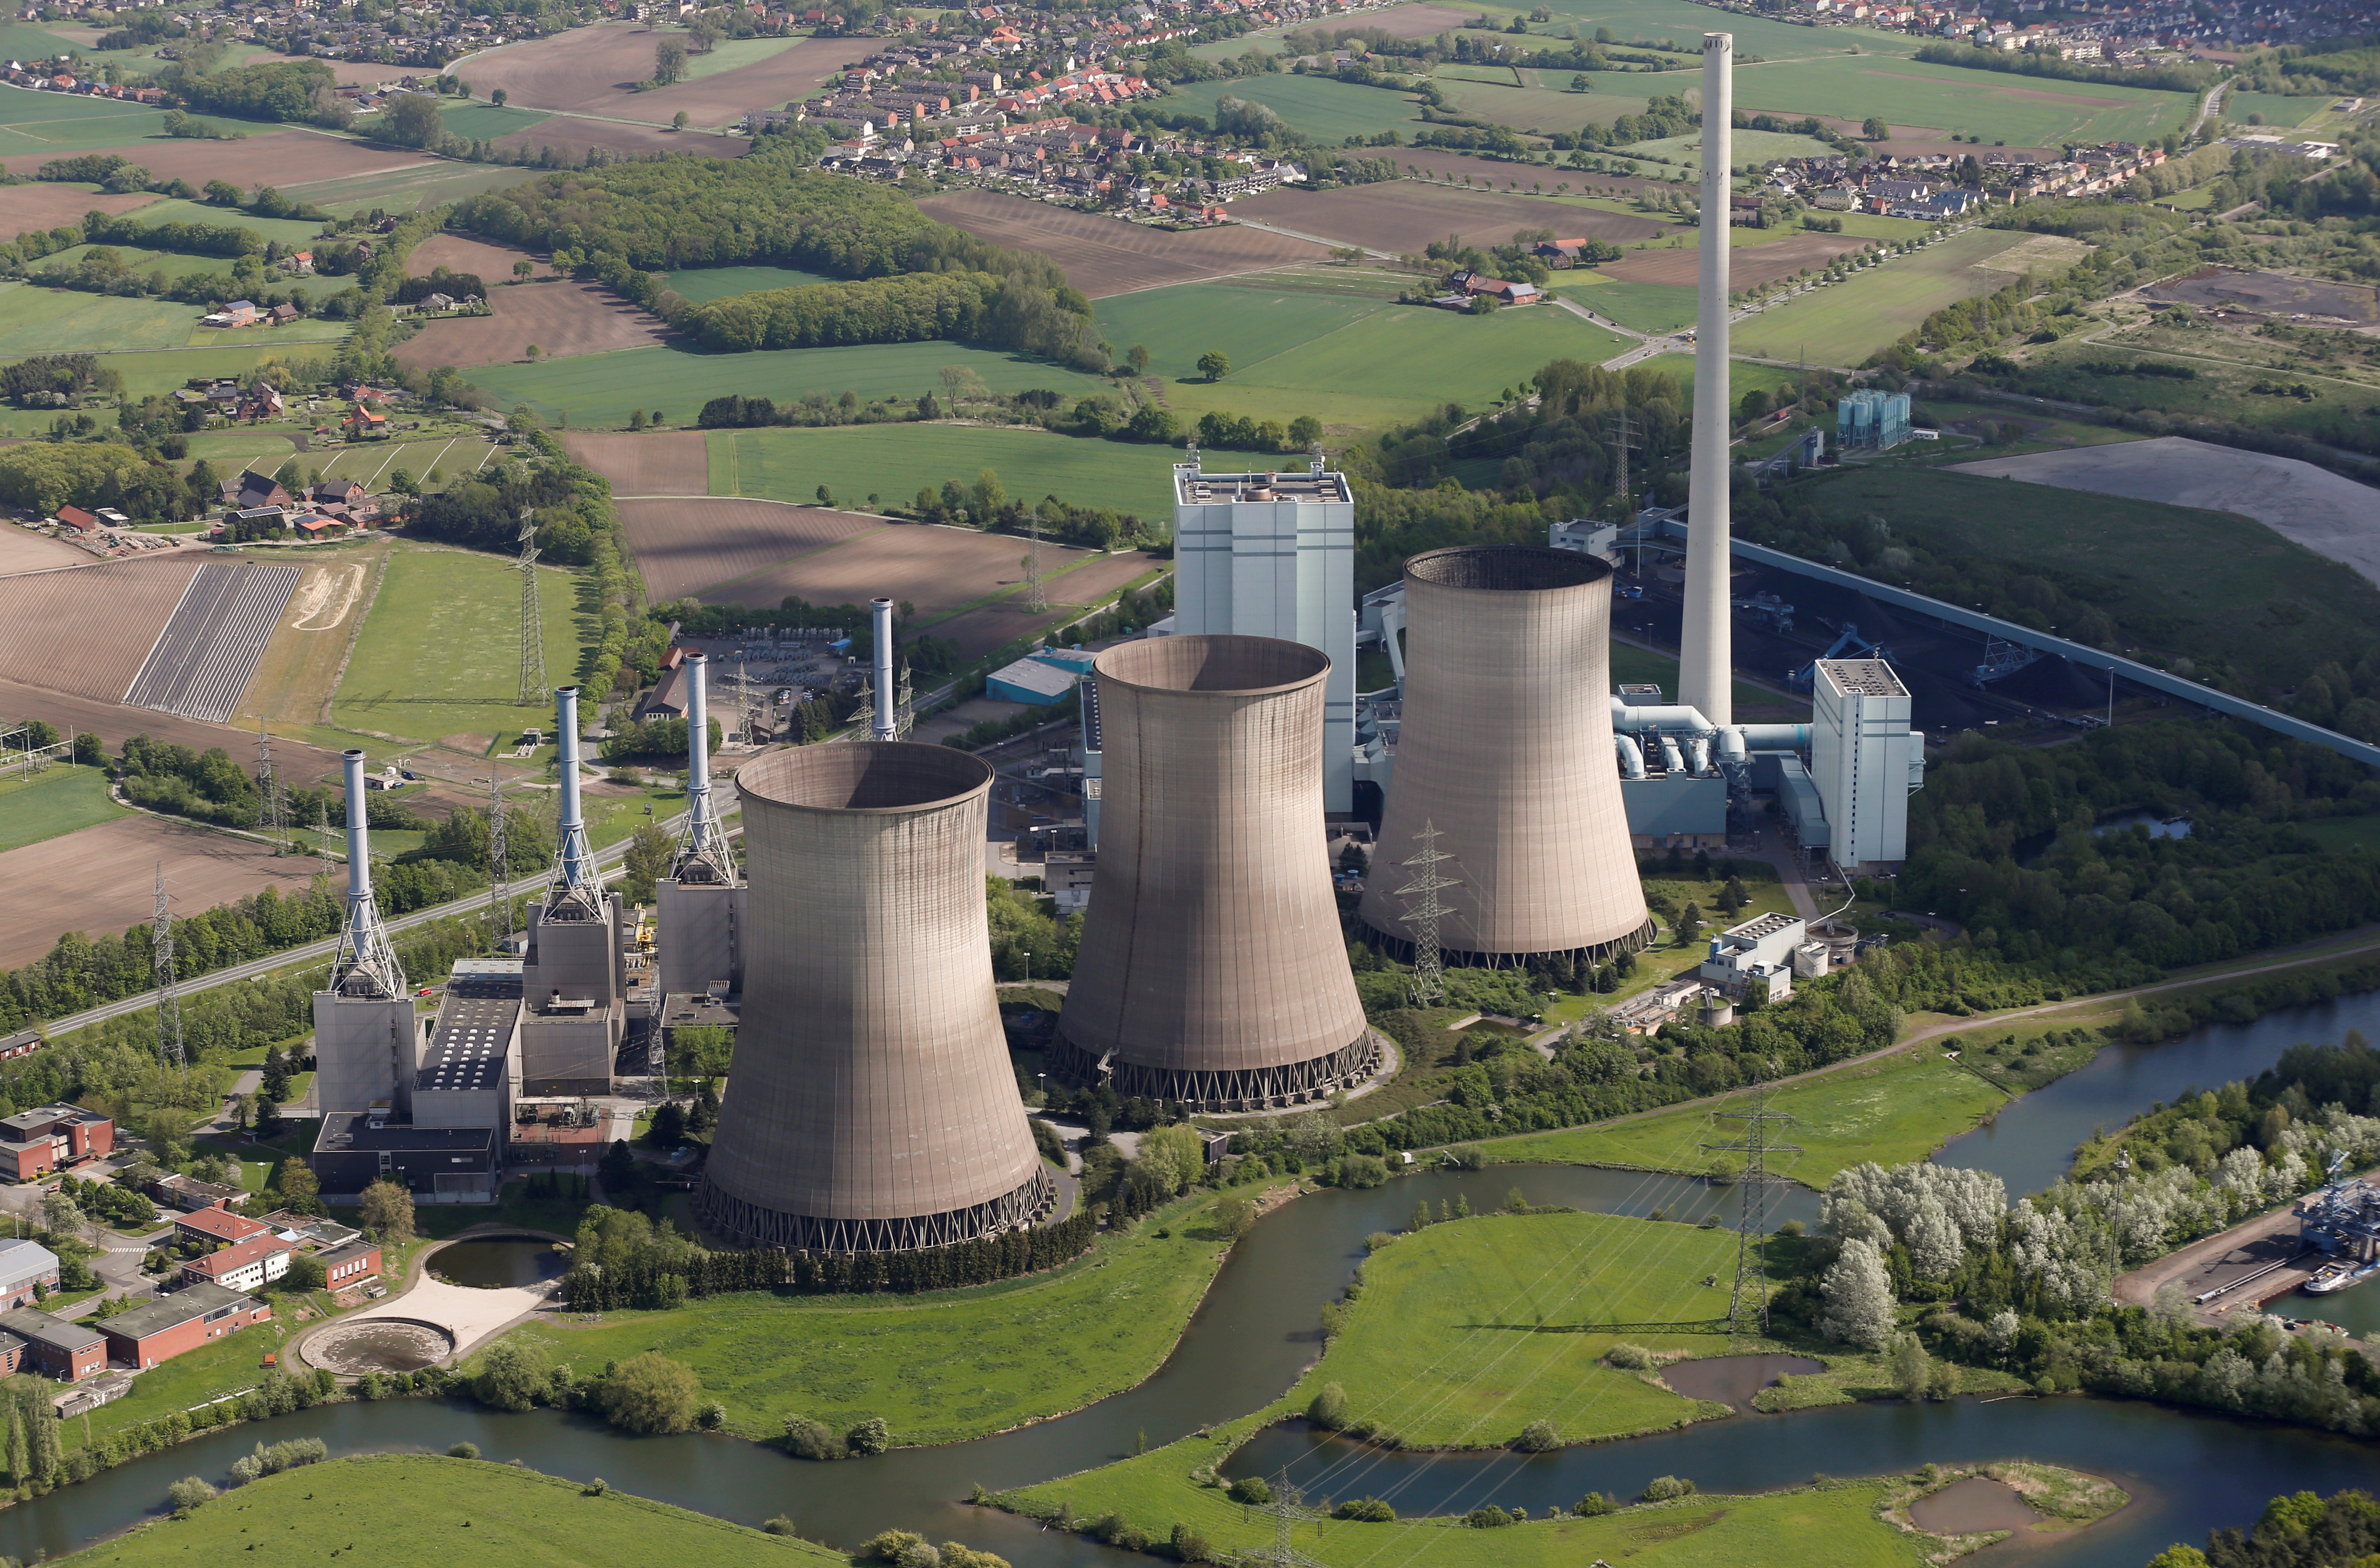 An aerial picture shows the four natural-gas power plants "Gersteinwerk" of Germany's RWE Power near the western German city of Hamm